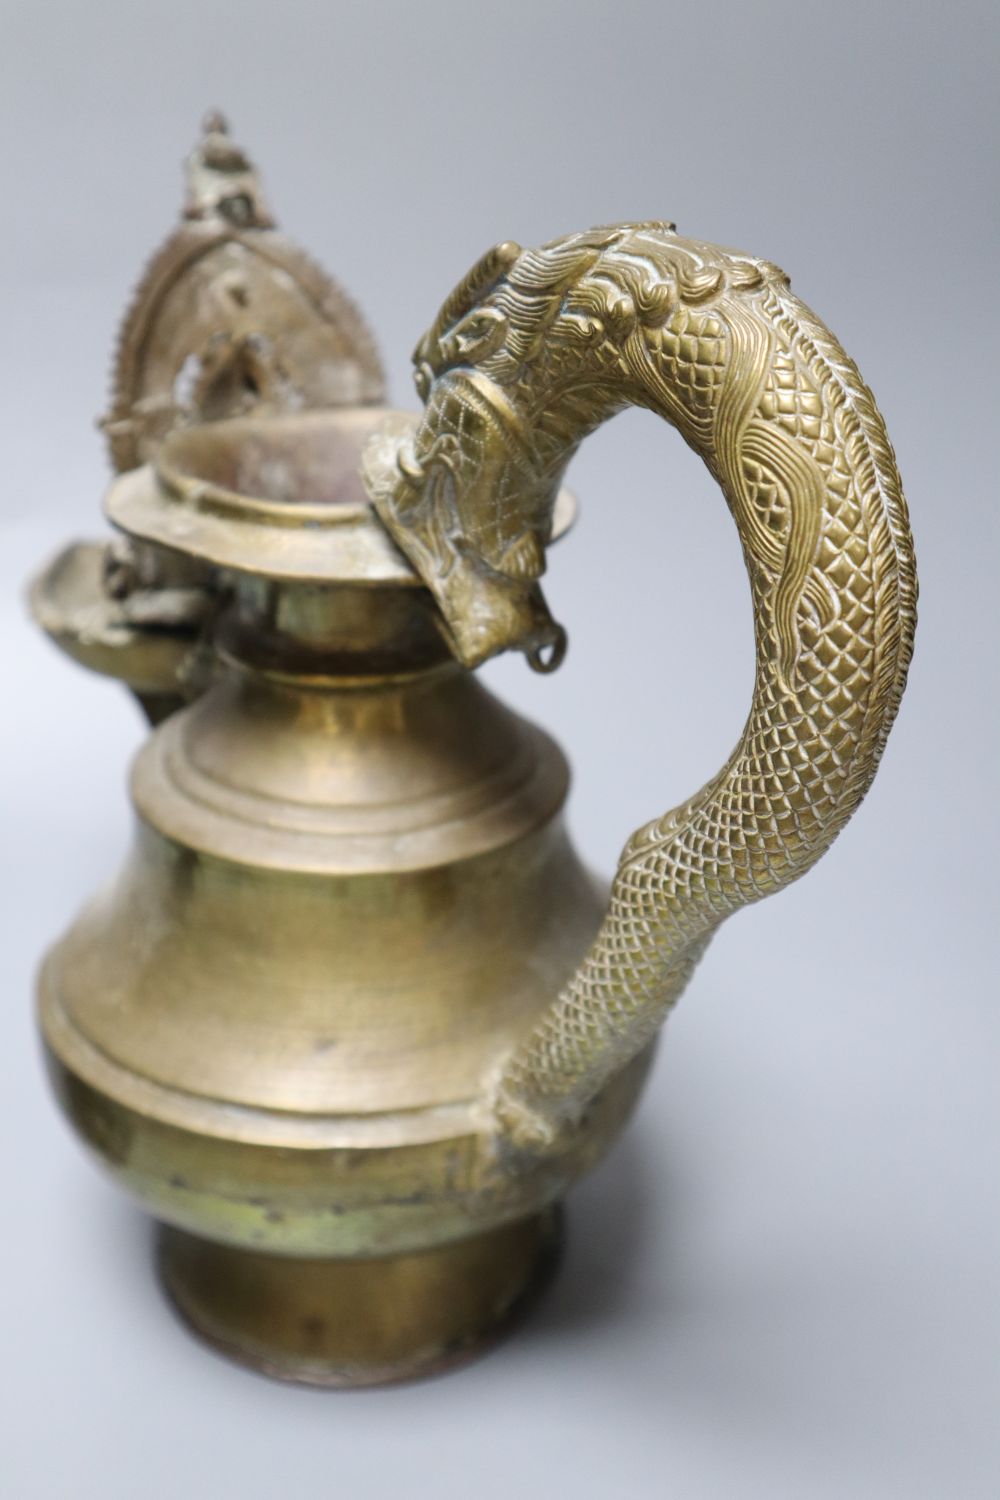 A Himalayan Buddhist brass lamp/ewer with related ladle, 26cm, 19th/20th century and a carved black mineral Chinese stone figure